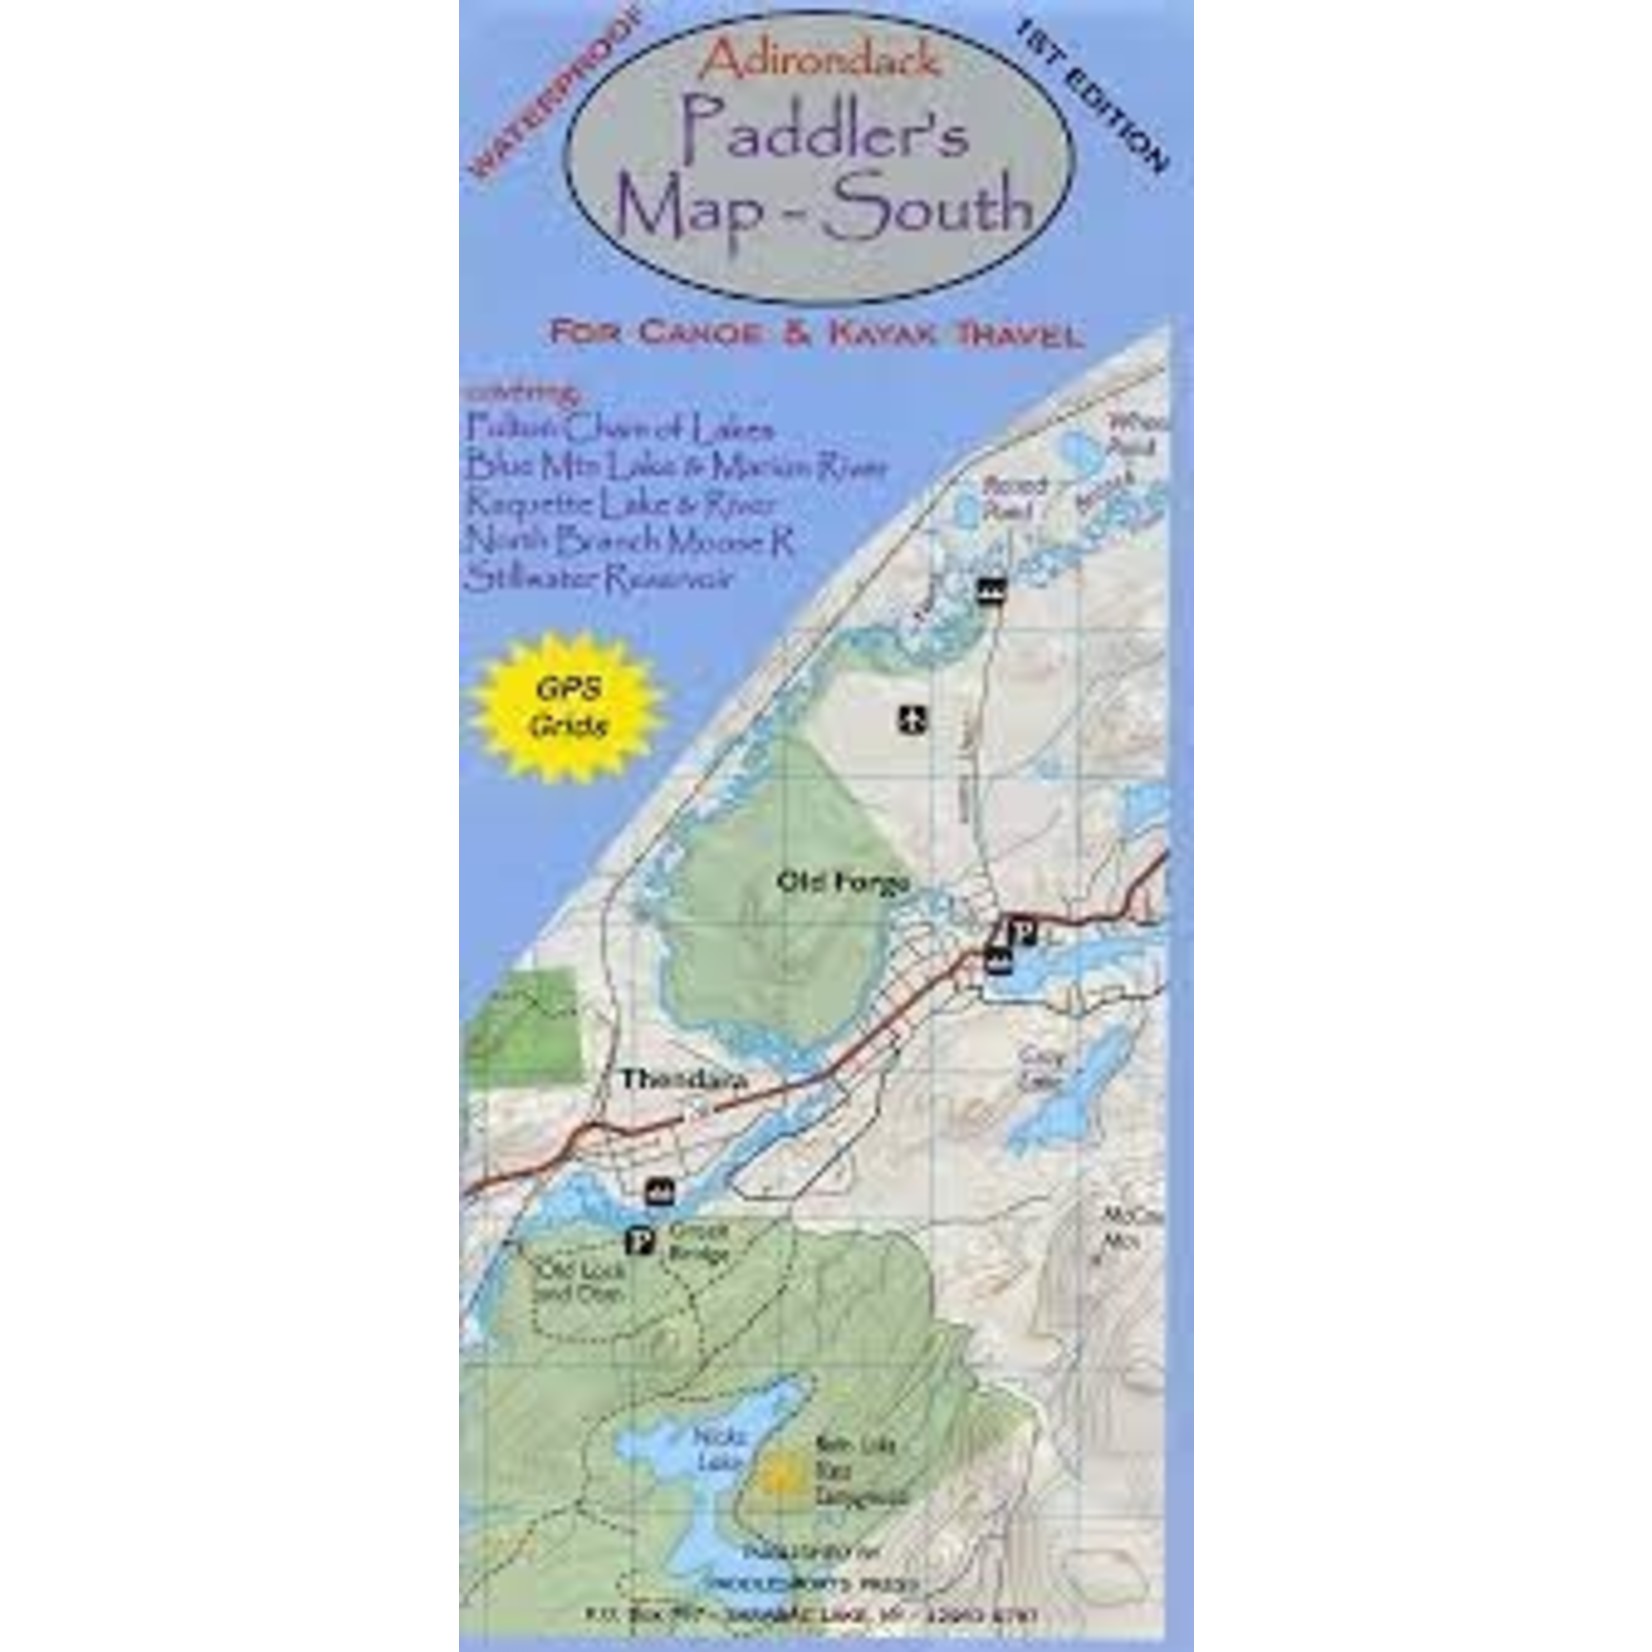 ADK PADDLERS MAP - SOUTH